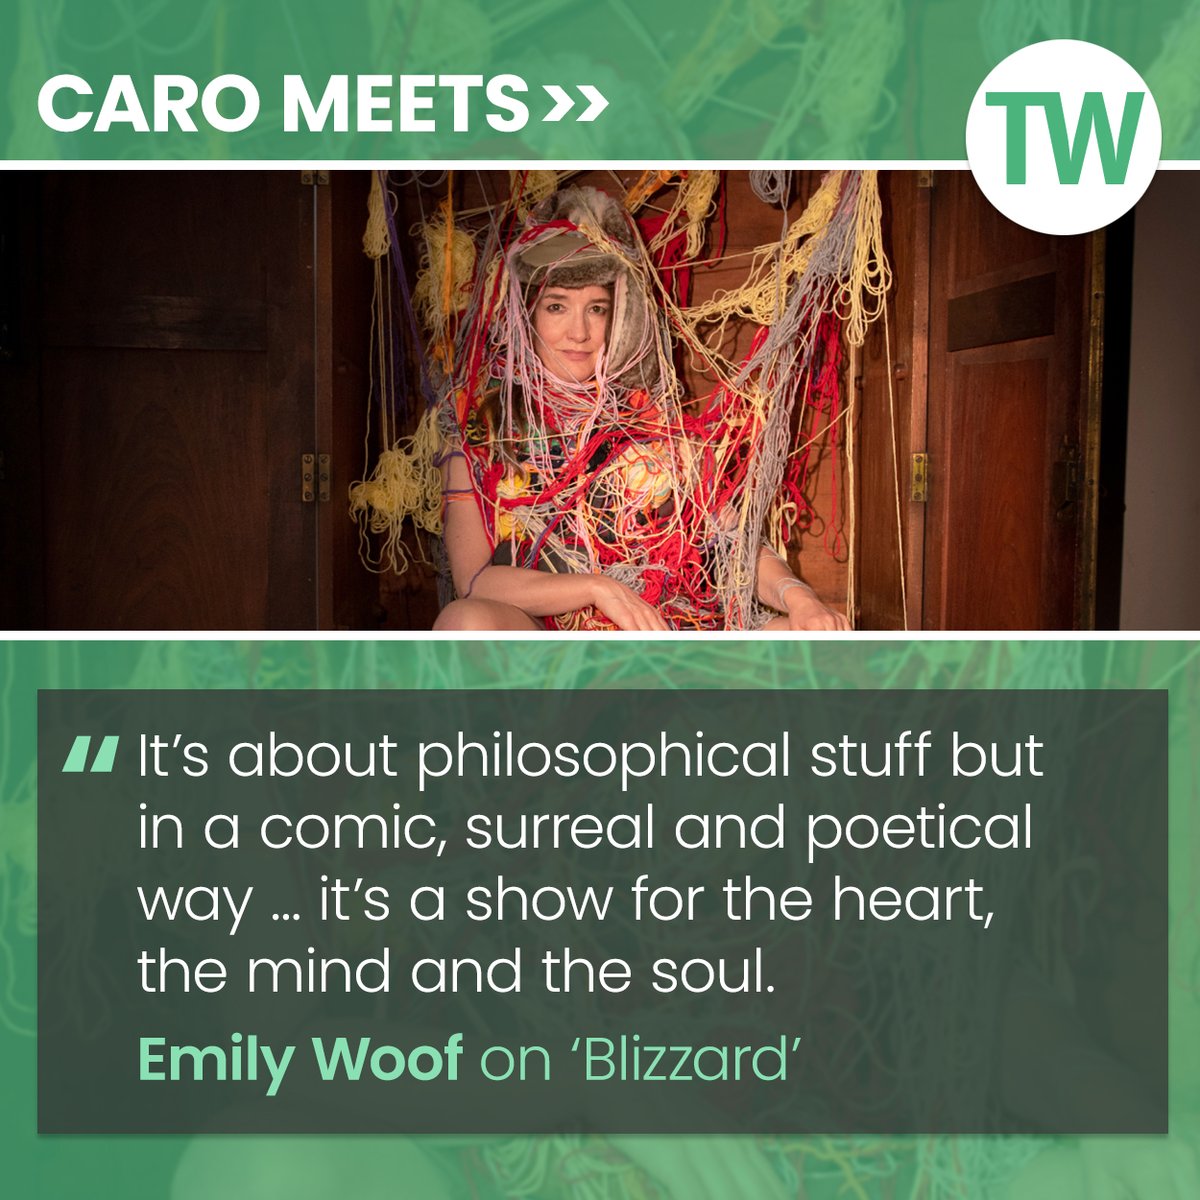 This week Caro Meets Emily Woof, who performs her acclaimed solo show 'Blizzard' at Soho Theatre from 7-25 May: bit.ly/44yMLft

@sohotheatre